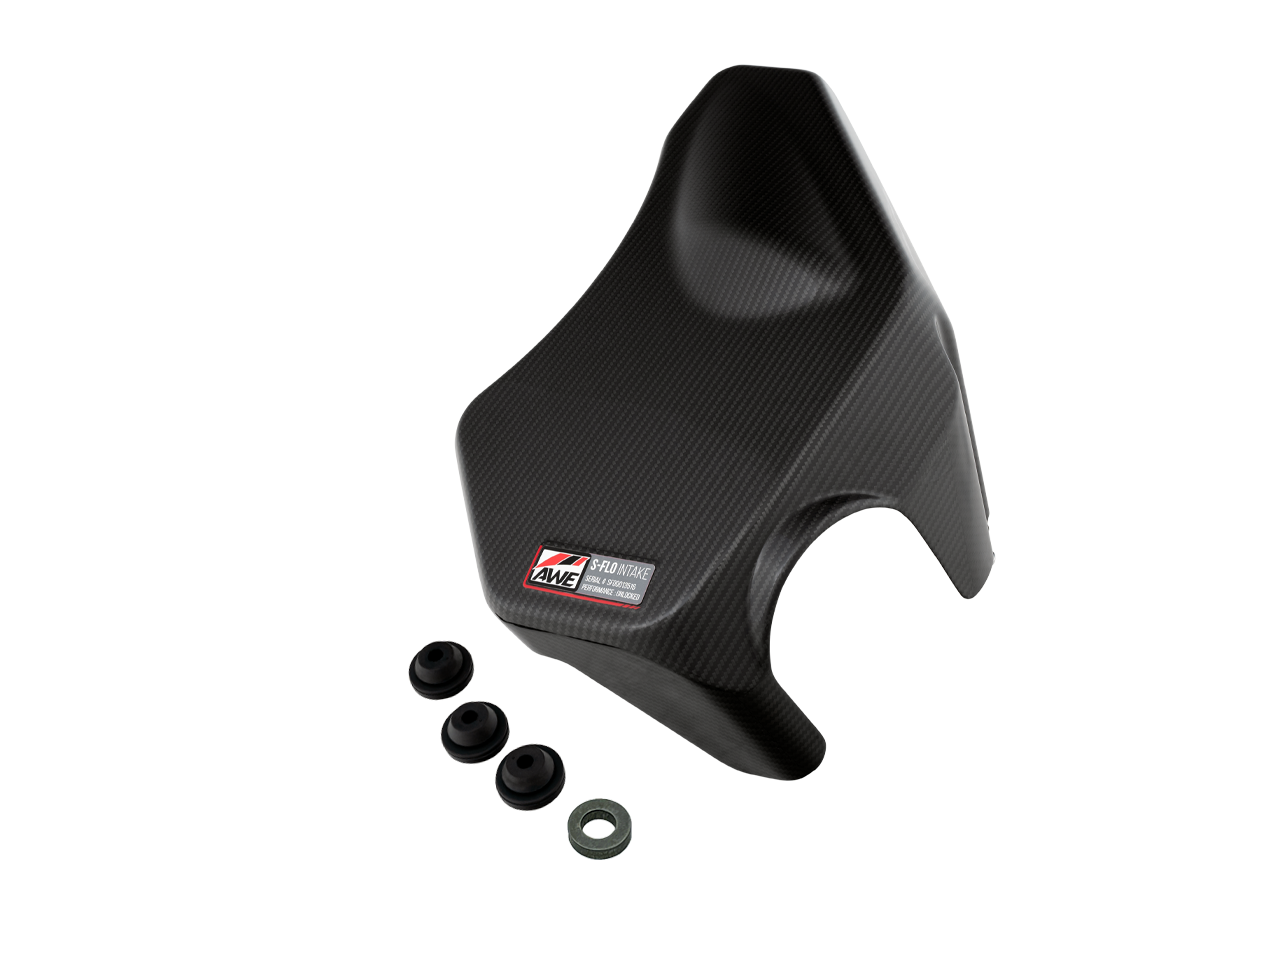 AWE Tuning 2020+ Toyota GR Supra S-FLO Carbon Intake for the MK5 Toyota Supra GR A90 MKV - Intake cover components/mounting accessories